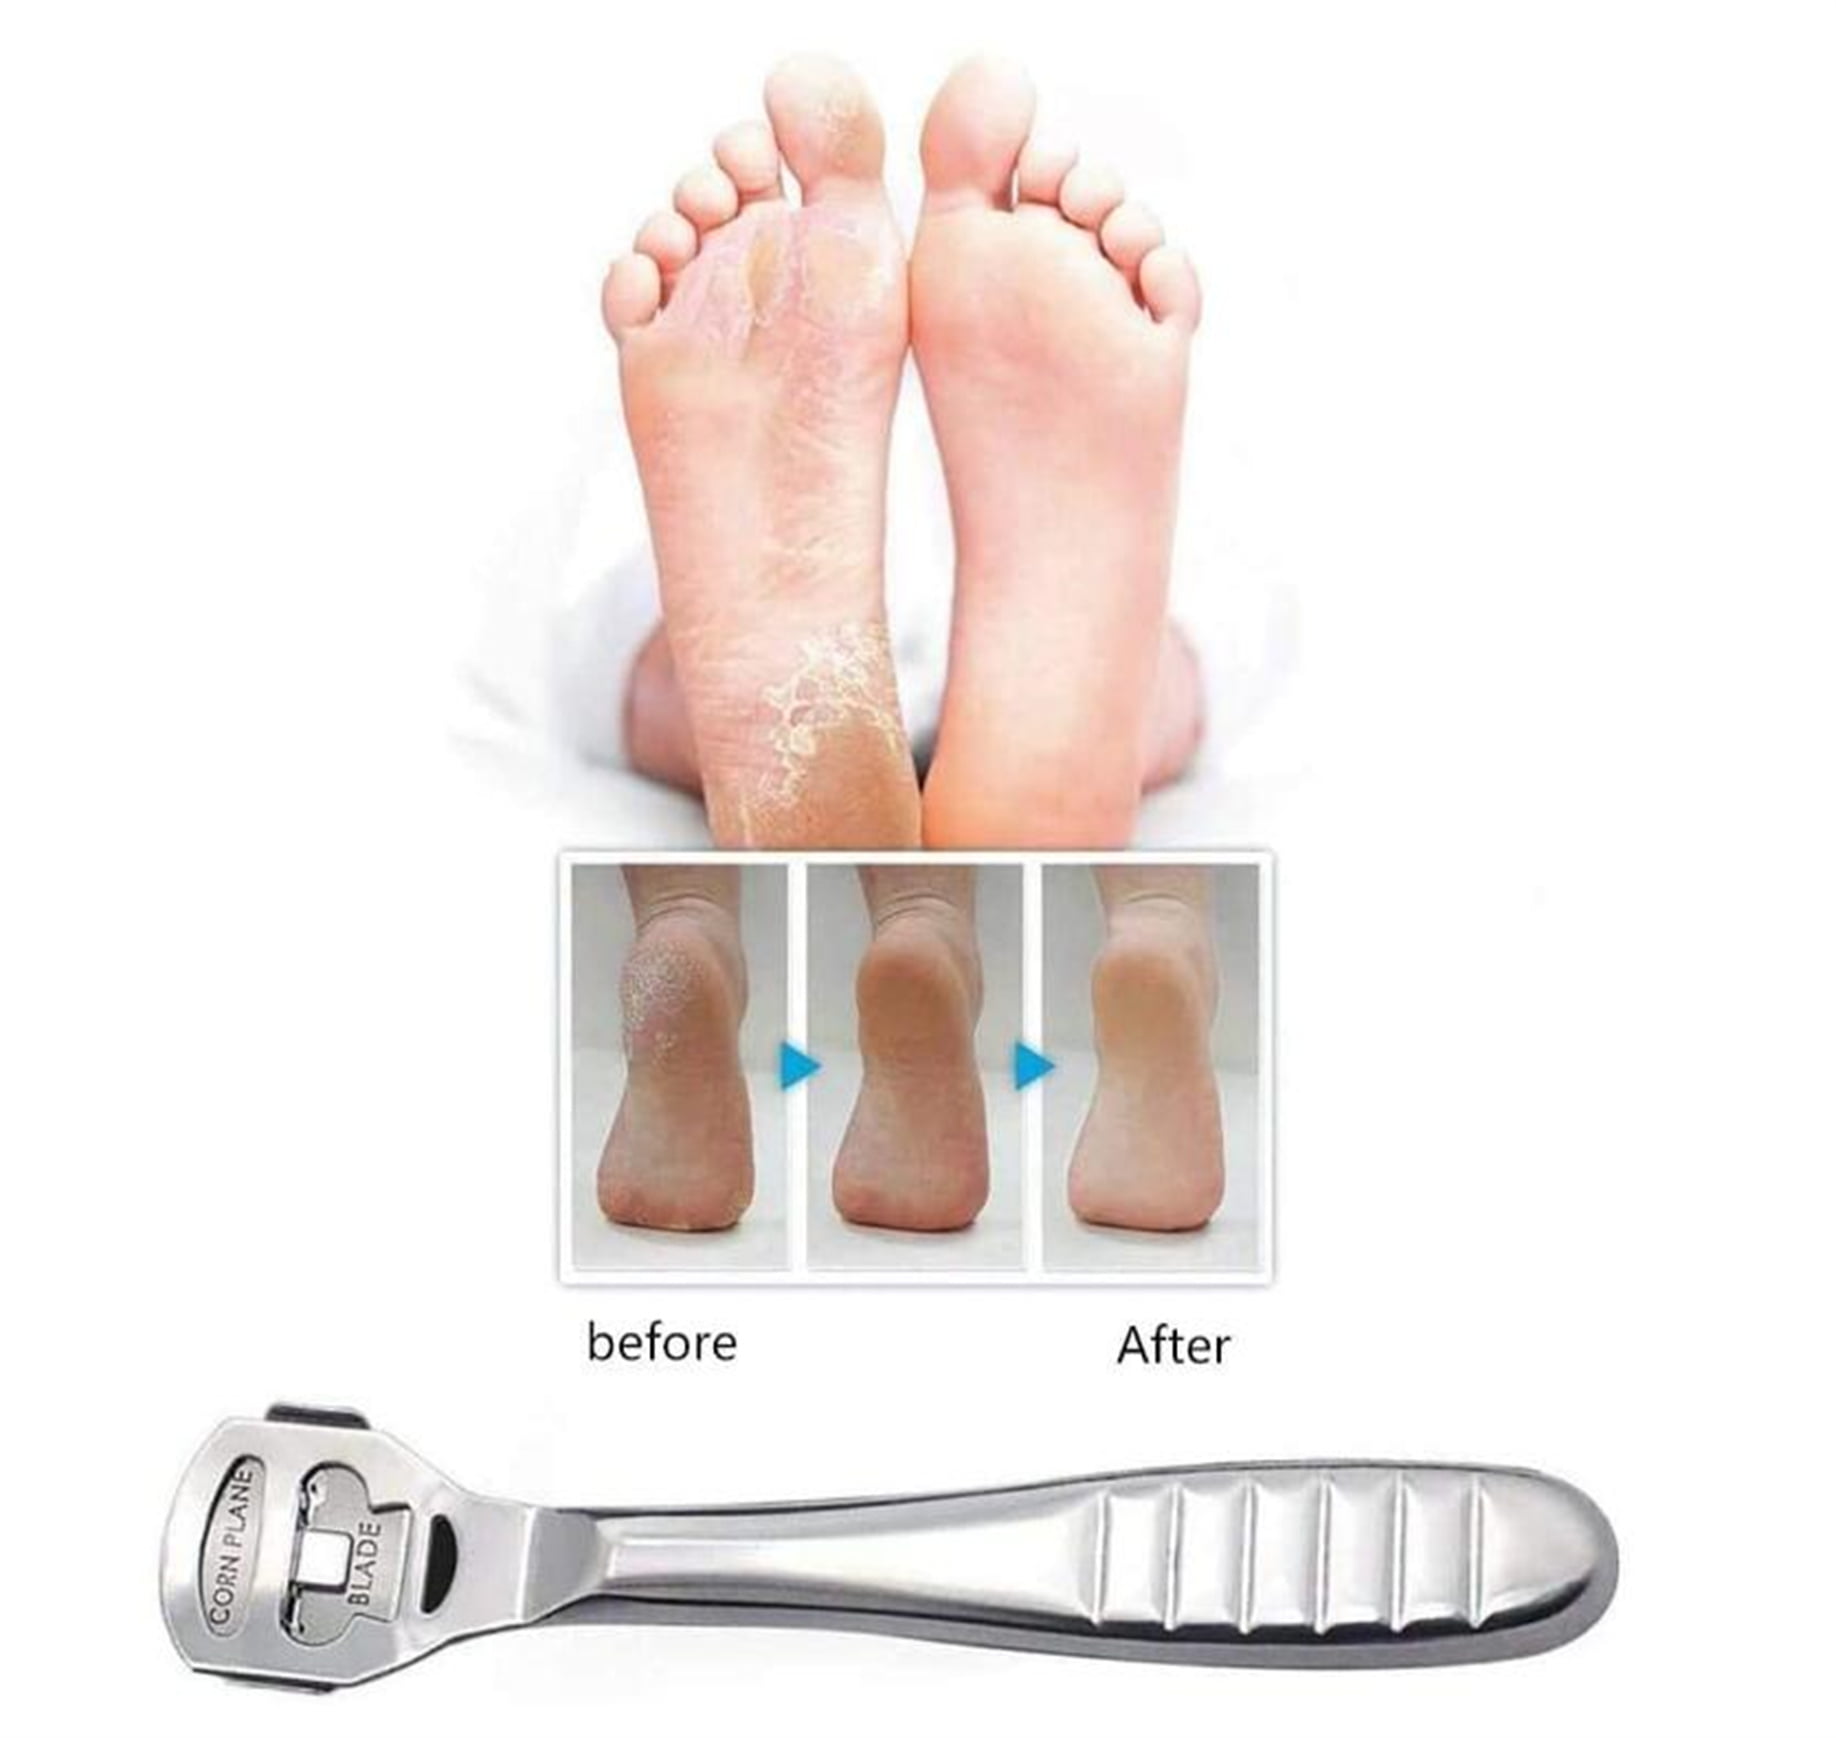 Foot Scraper for Dead Skin, Heel Scraper Care Callus for Feet - Stainless Steel Foot File and Shaver Callus Remover Tool Set with 10 Replaceable